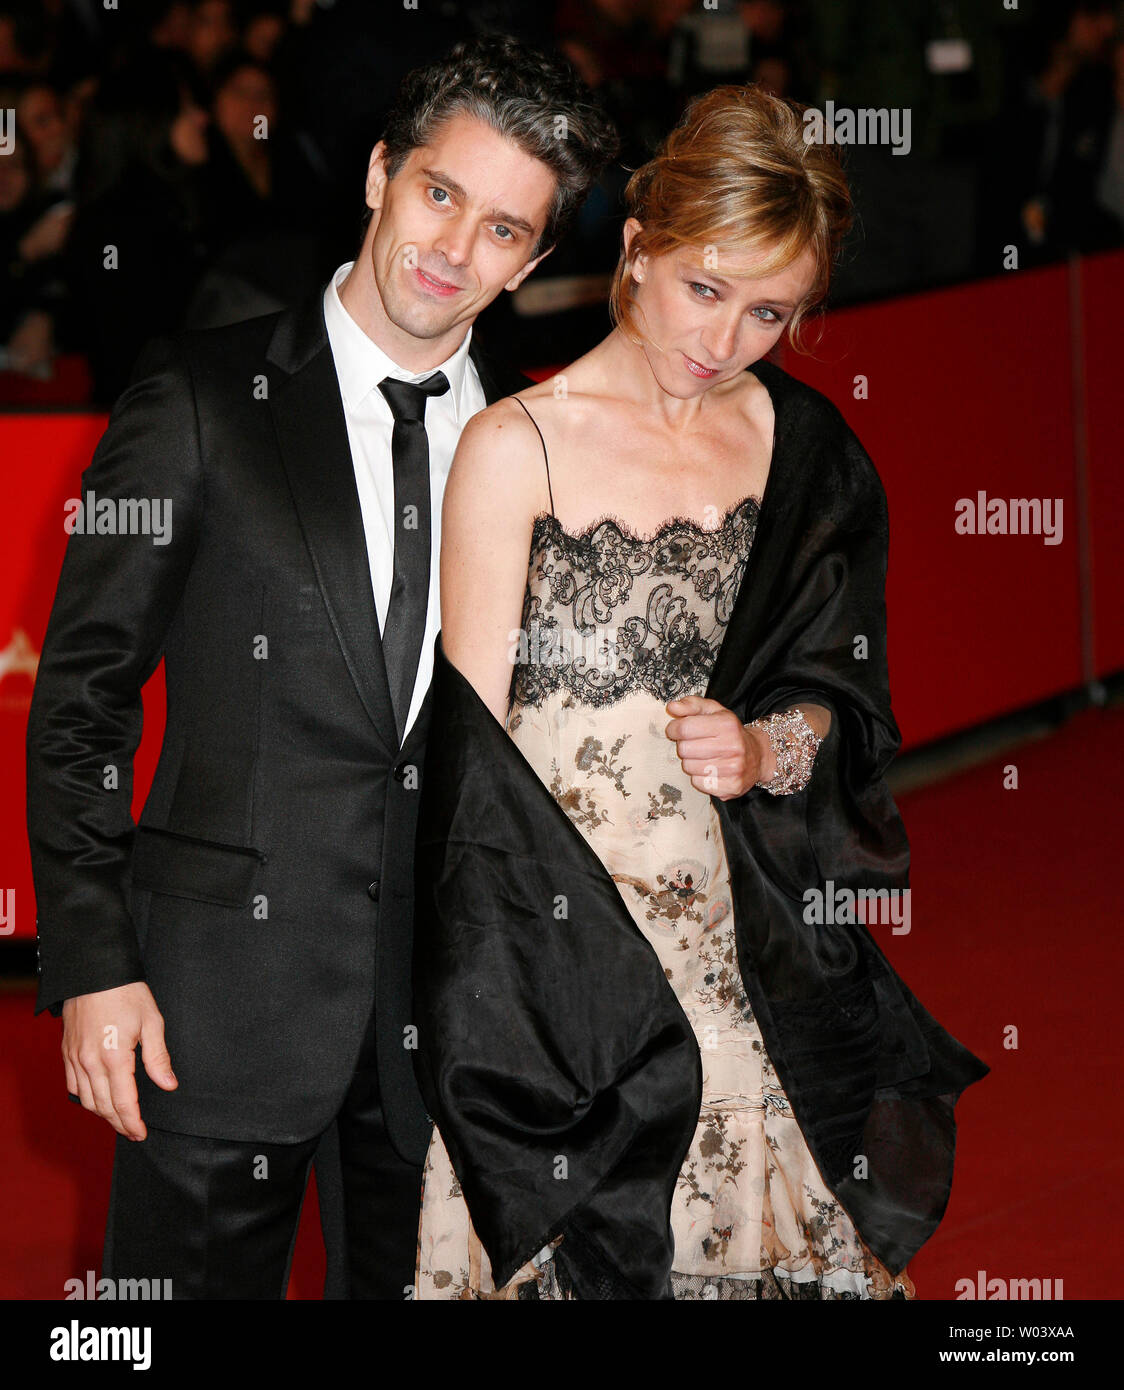 Actor James Thierree and actress Sylvie Testud arrive on the red carpet at the Rome Film Festival in Rome on October 21, 2007.  Thierree and Testud are in Rome with their film 'Ce que mes yeux ont vu'.   (UPI Photo/David Silpa) Stock Photo